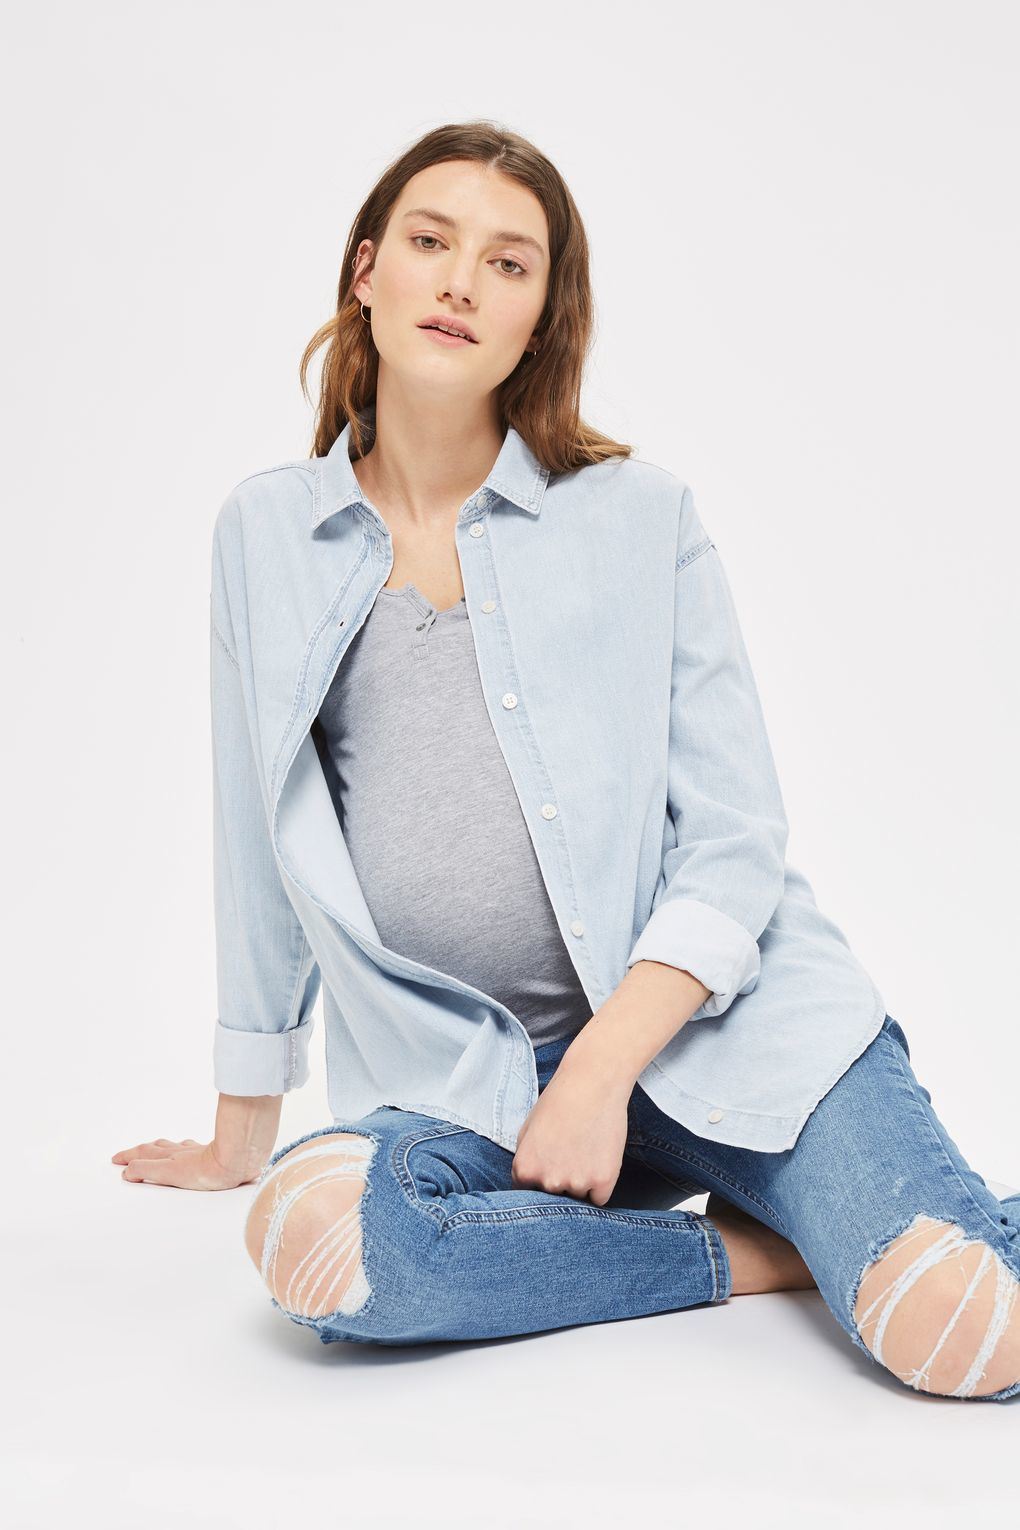 Hot Sale Casual Styles Maternity Bleach Denim Shirts for Your Own Logo